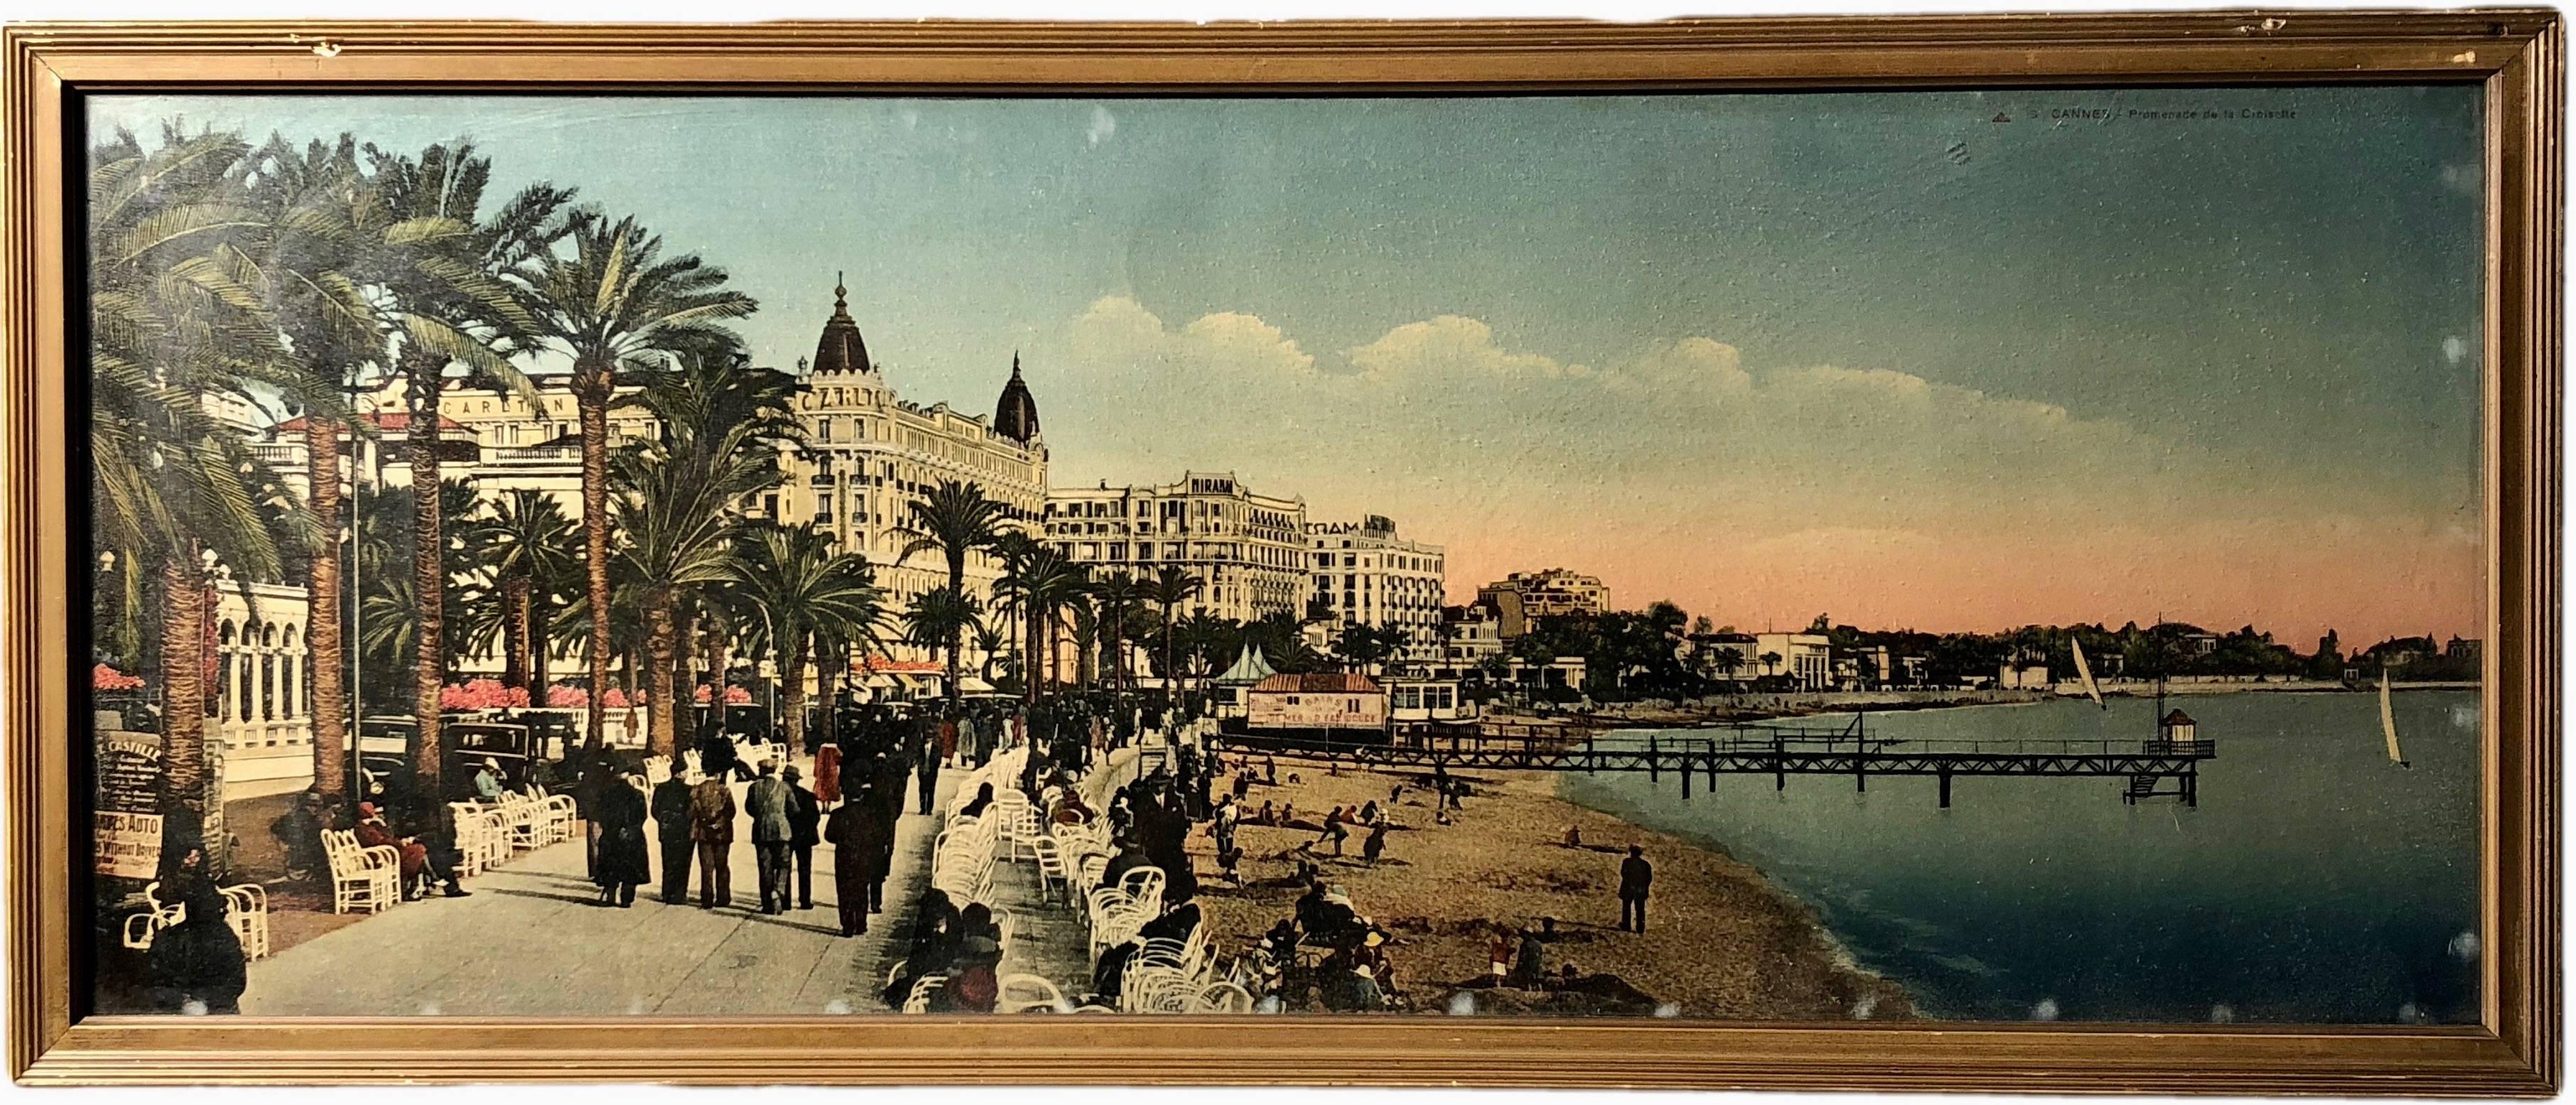 These are three lovely French Souvenir colorized photos of Cannes, Nice and Menton from the early 1900s. All are in decorative wooden frames with glass.
The first is the city of Menton, its gardens, casino and Montagnes Ste Agnès
The second is the